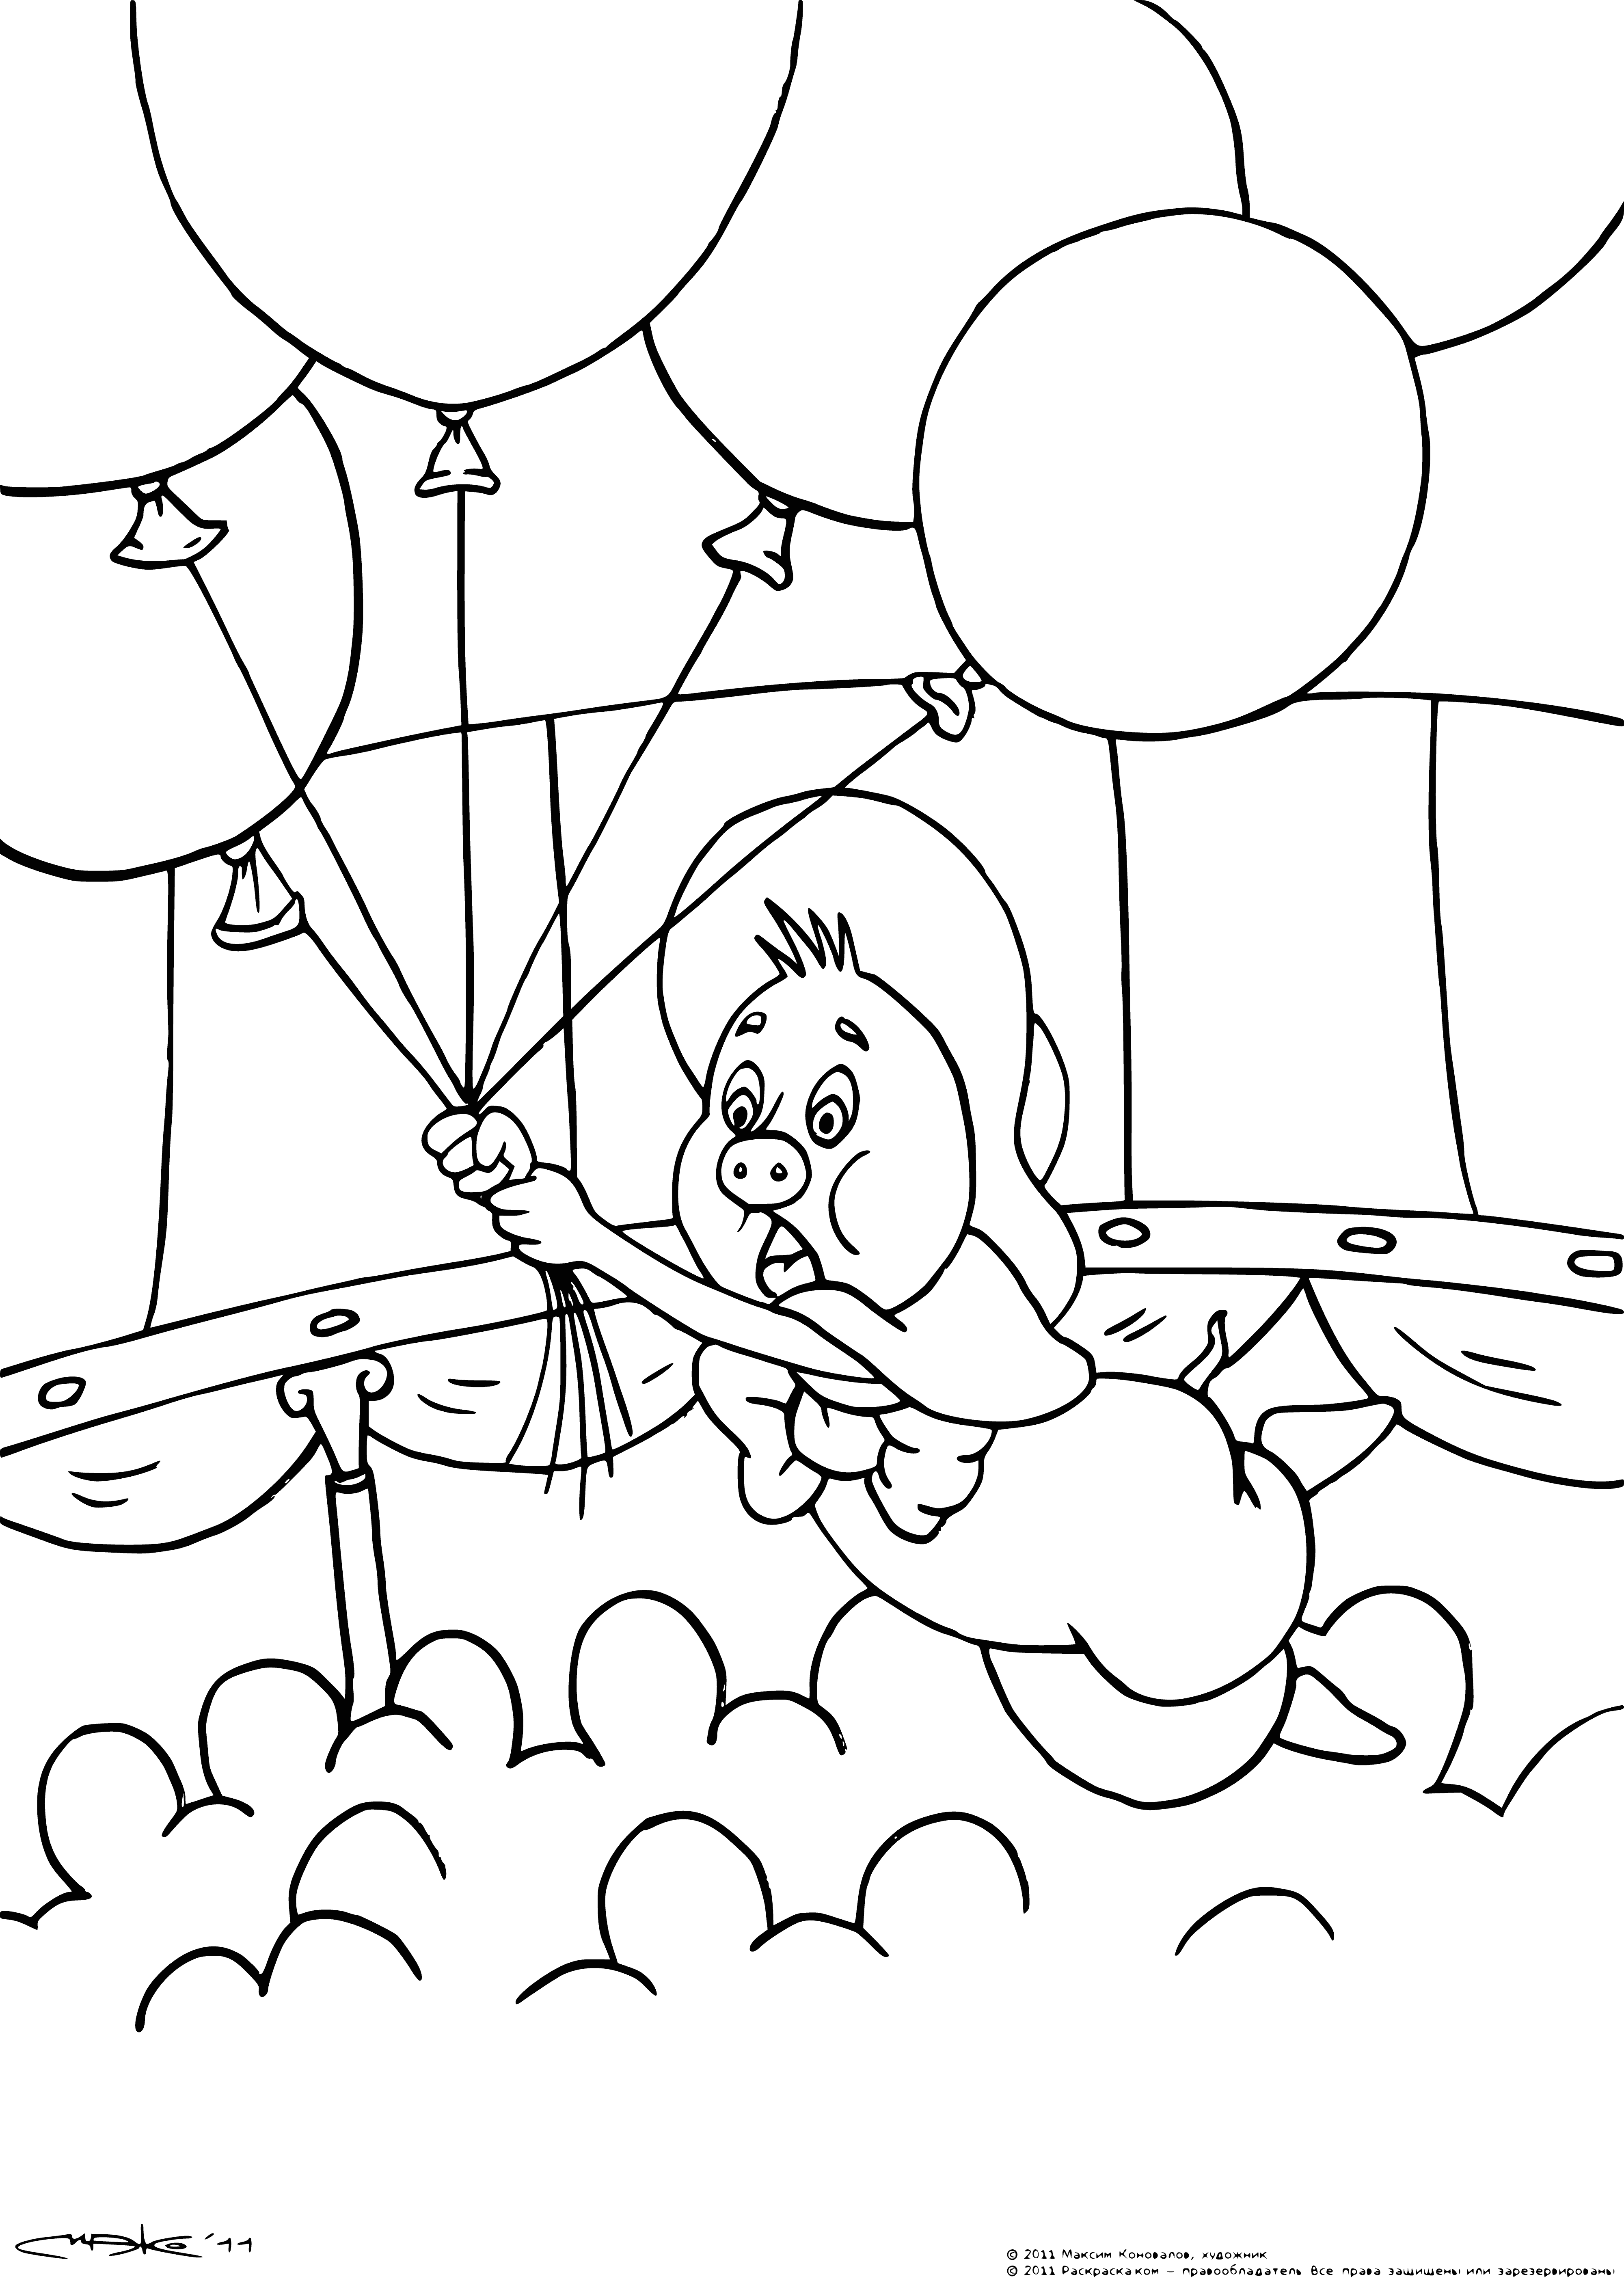 coloring page: Funtik the pig is having fun playing in the mud and getting dirty.